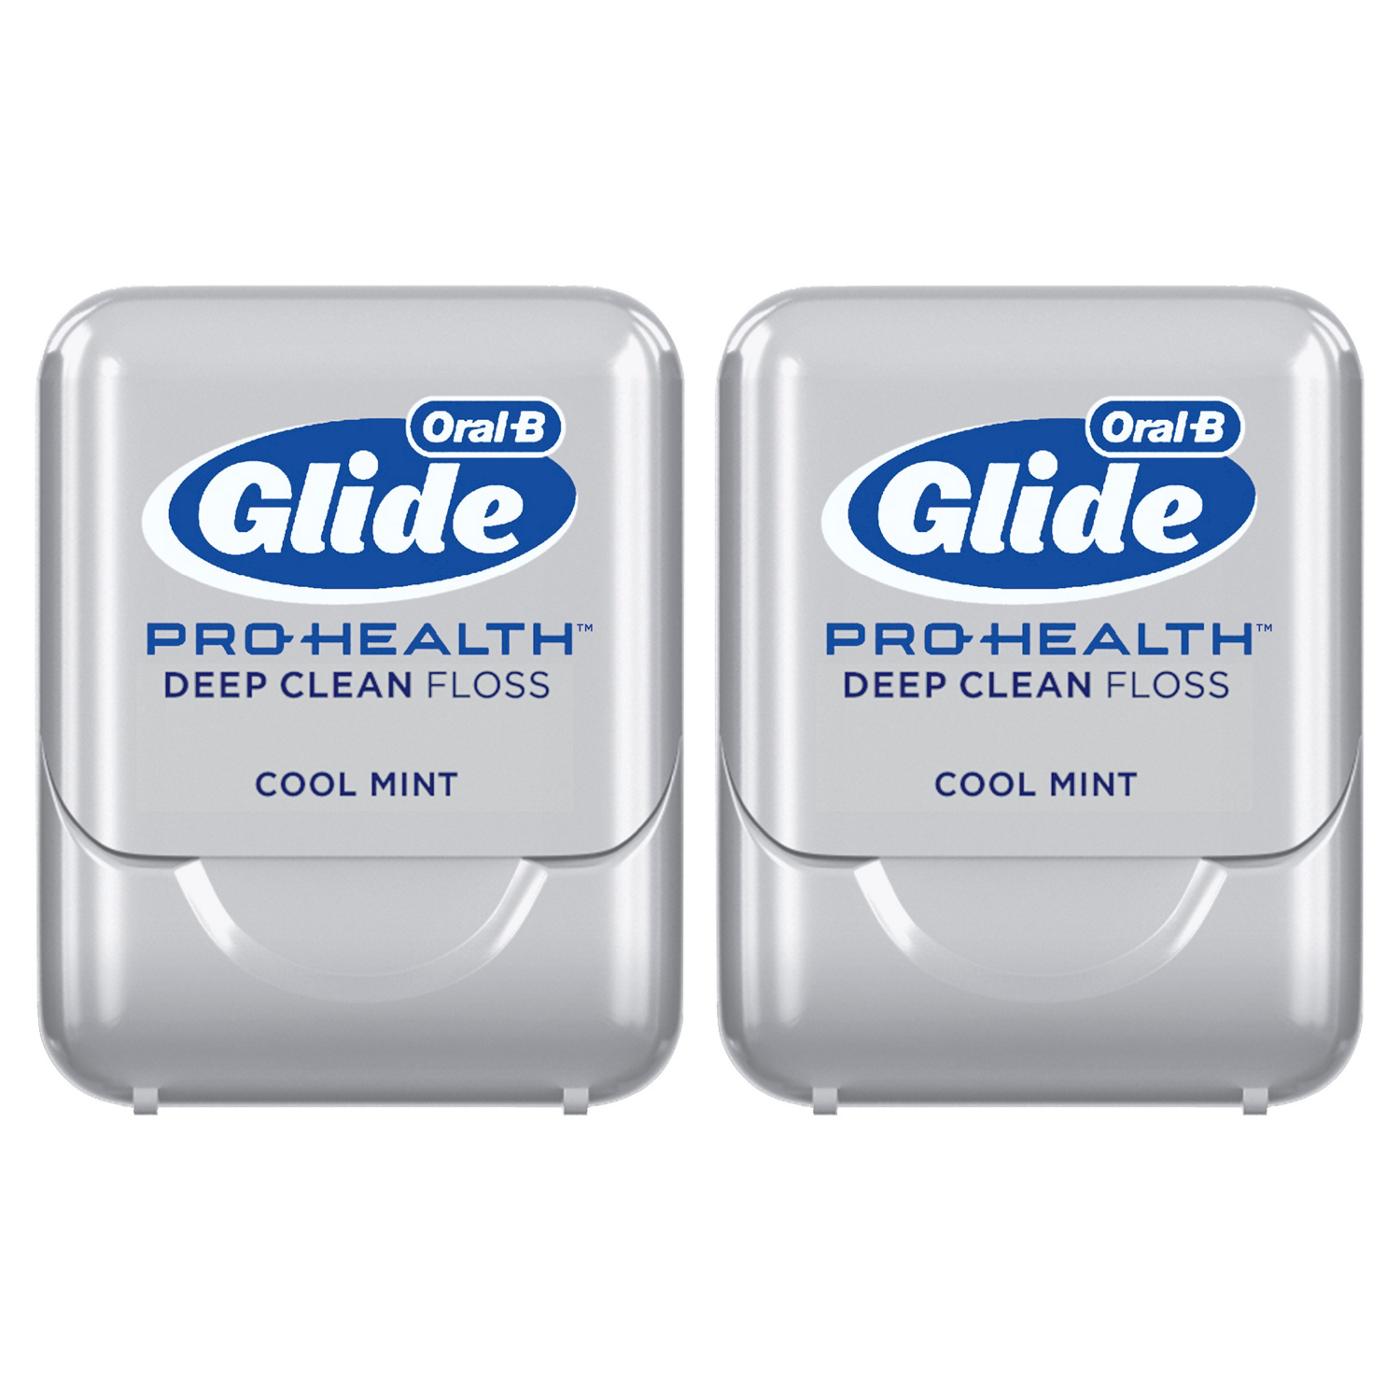 Oral-B Glide Pro-Health Deep Clean Dental Floss - Cool Mint; image 8 of 8